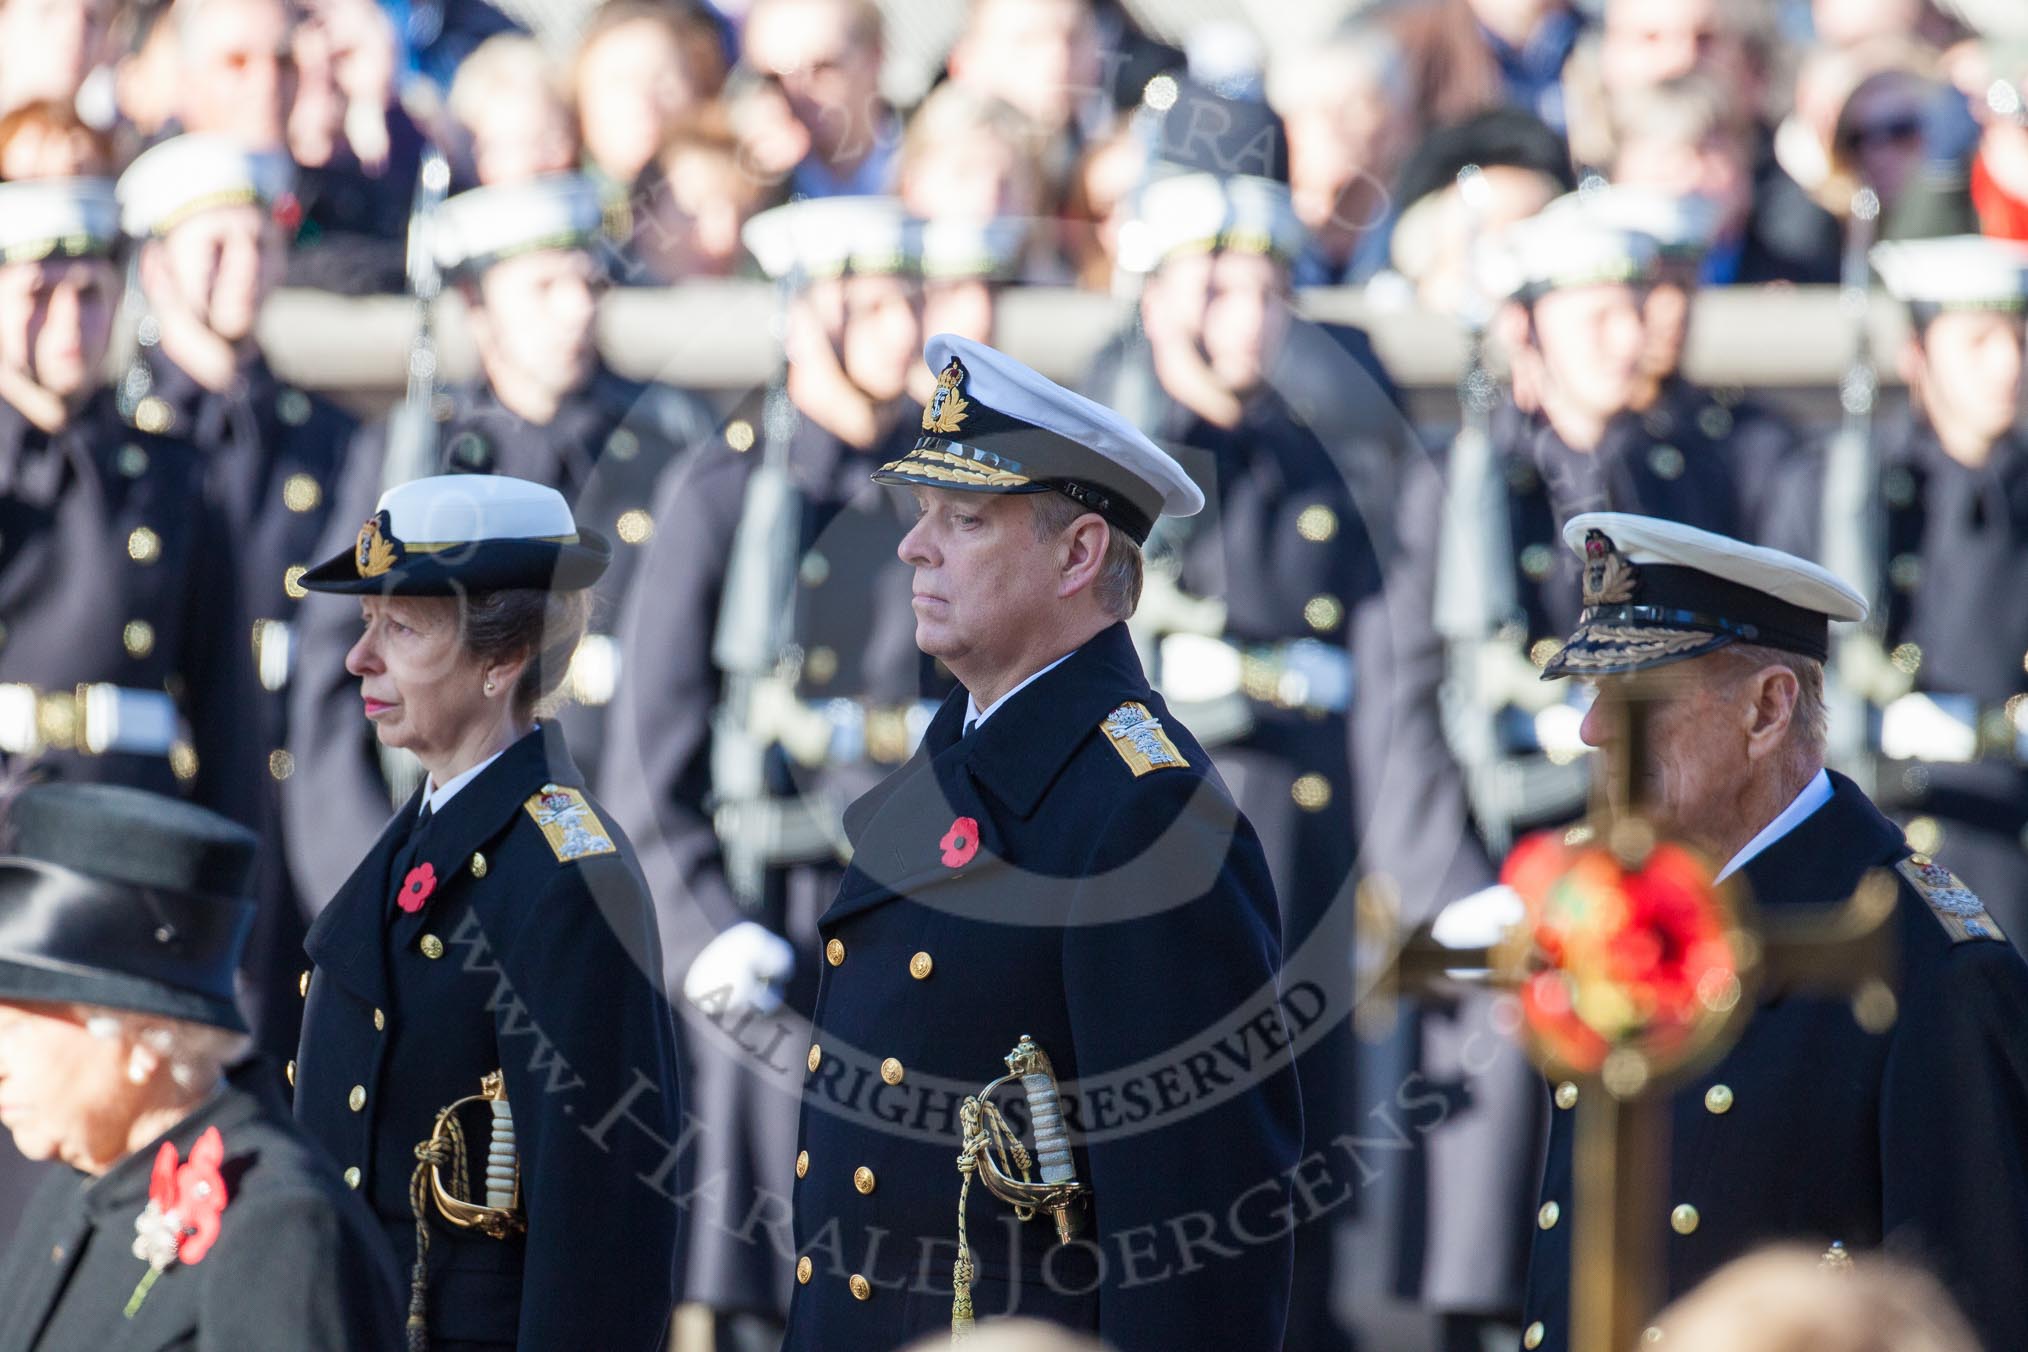 The golden cross with the poppies carried by the cross bearer, out of focus, and HRH The Princess Royal, HRH The Duke of York and HRH The Duke of Edinburgh.